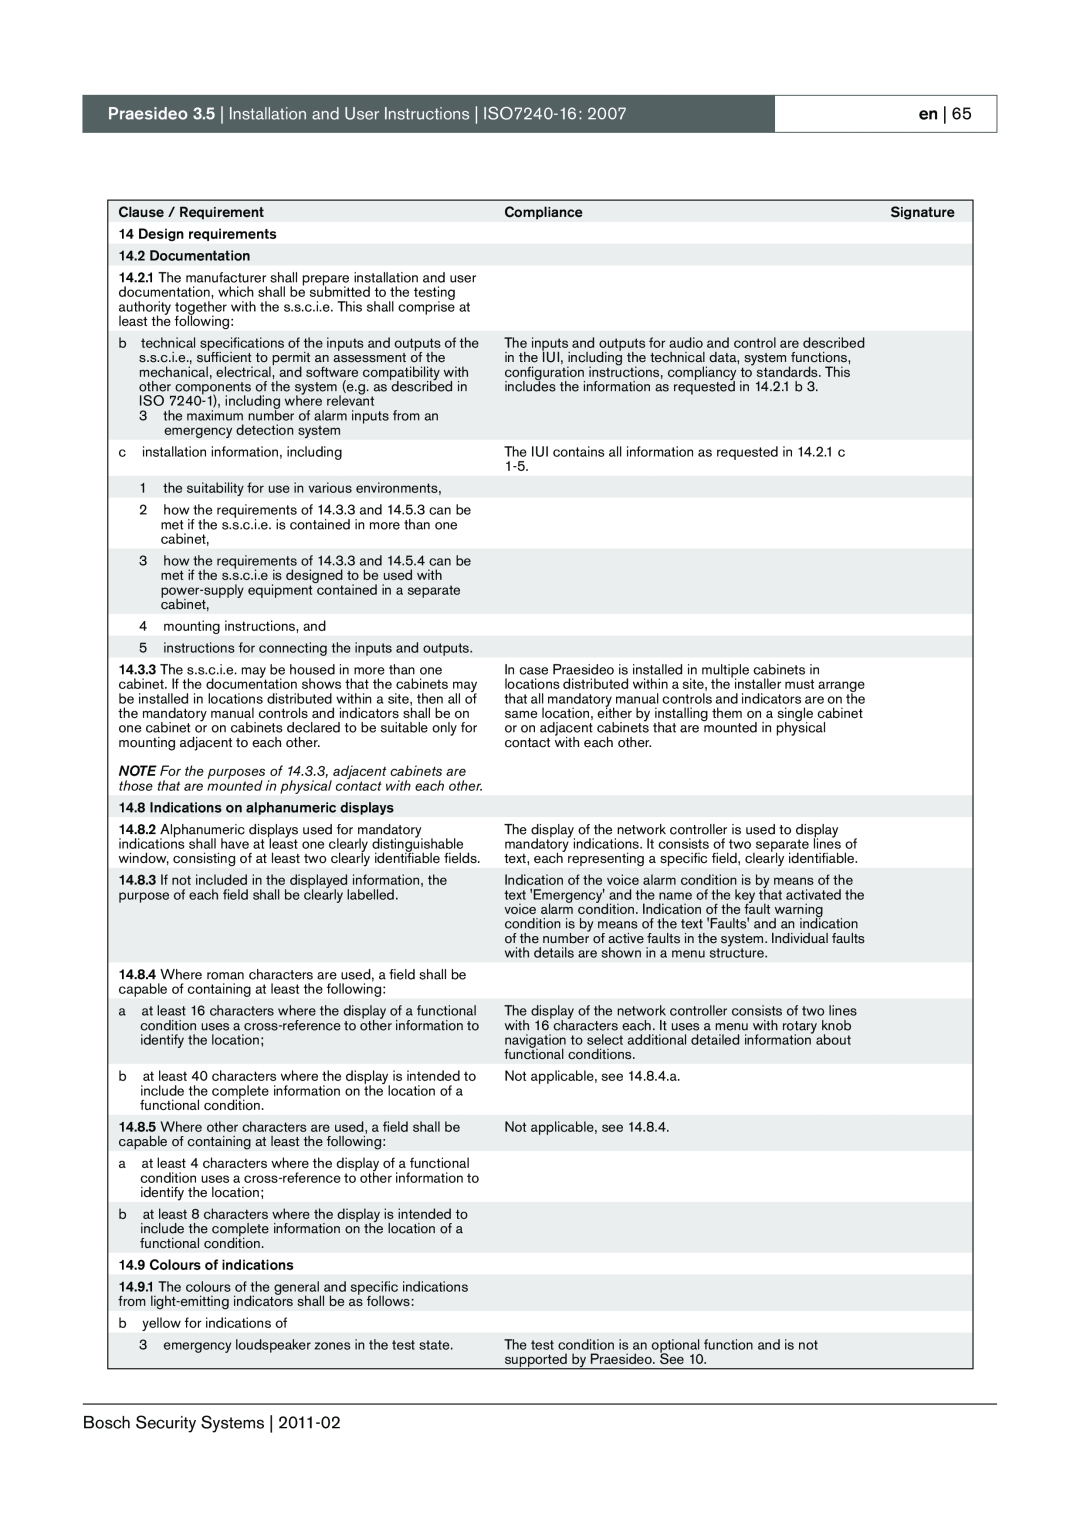 Bosch Appliances 3.5 manual Clause / Requirement 14 Design requirements 